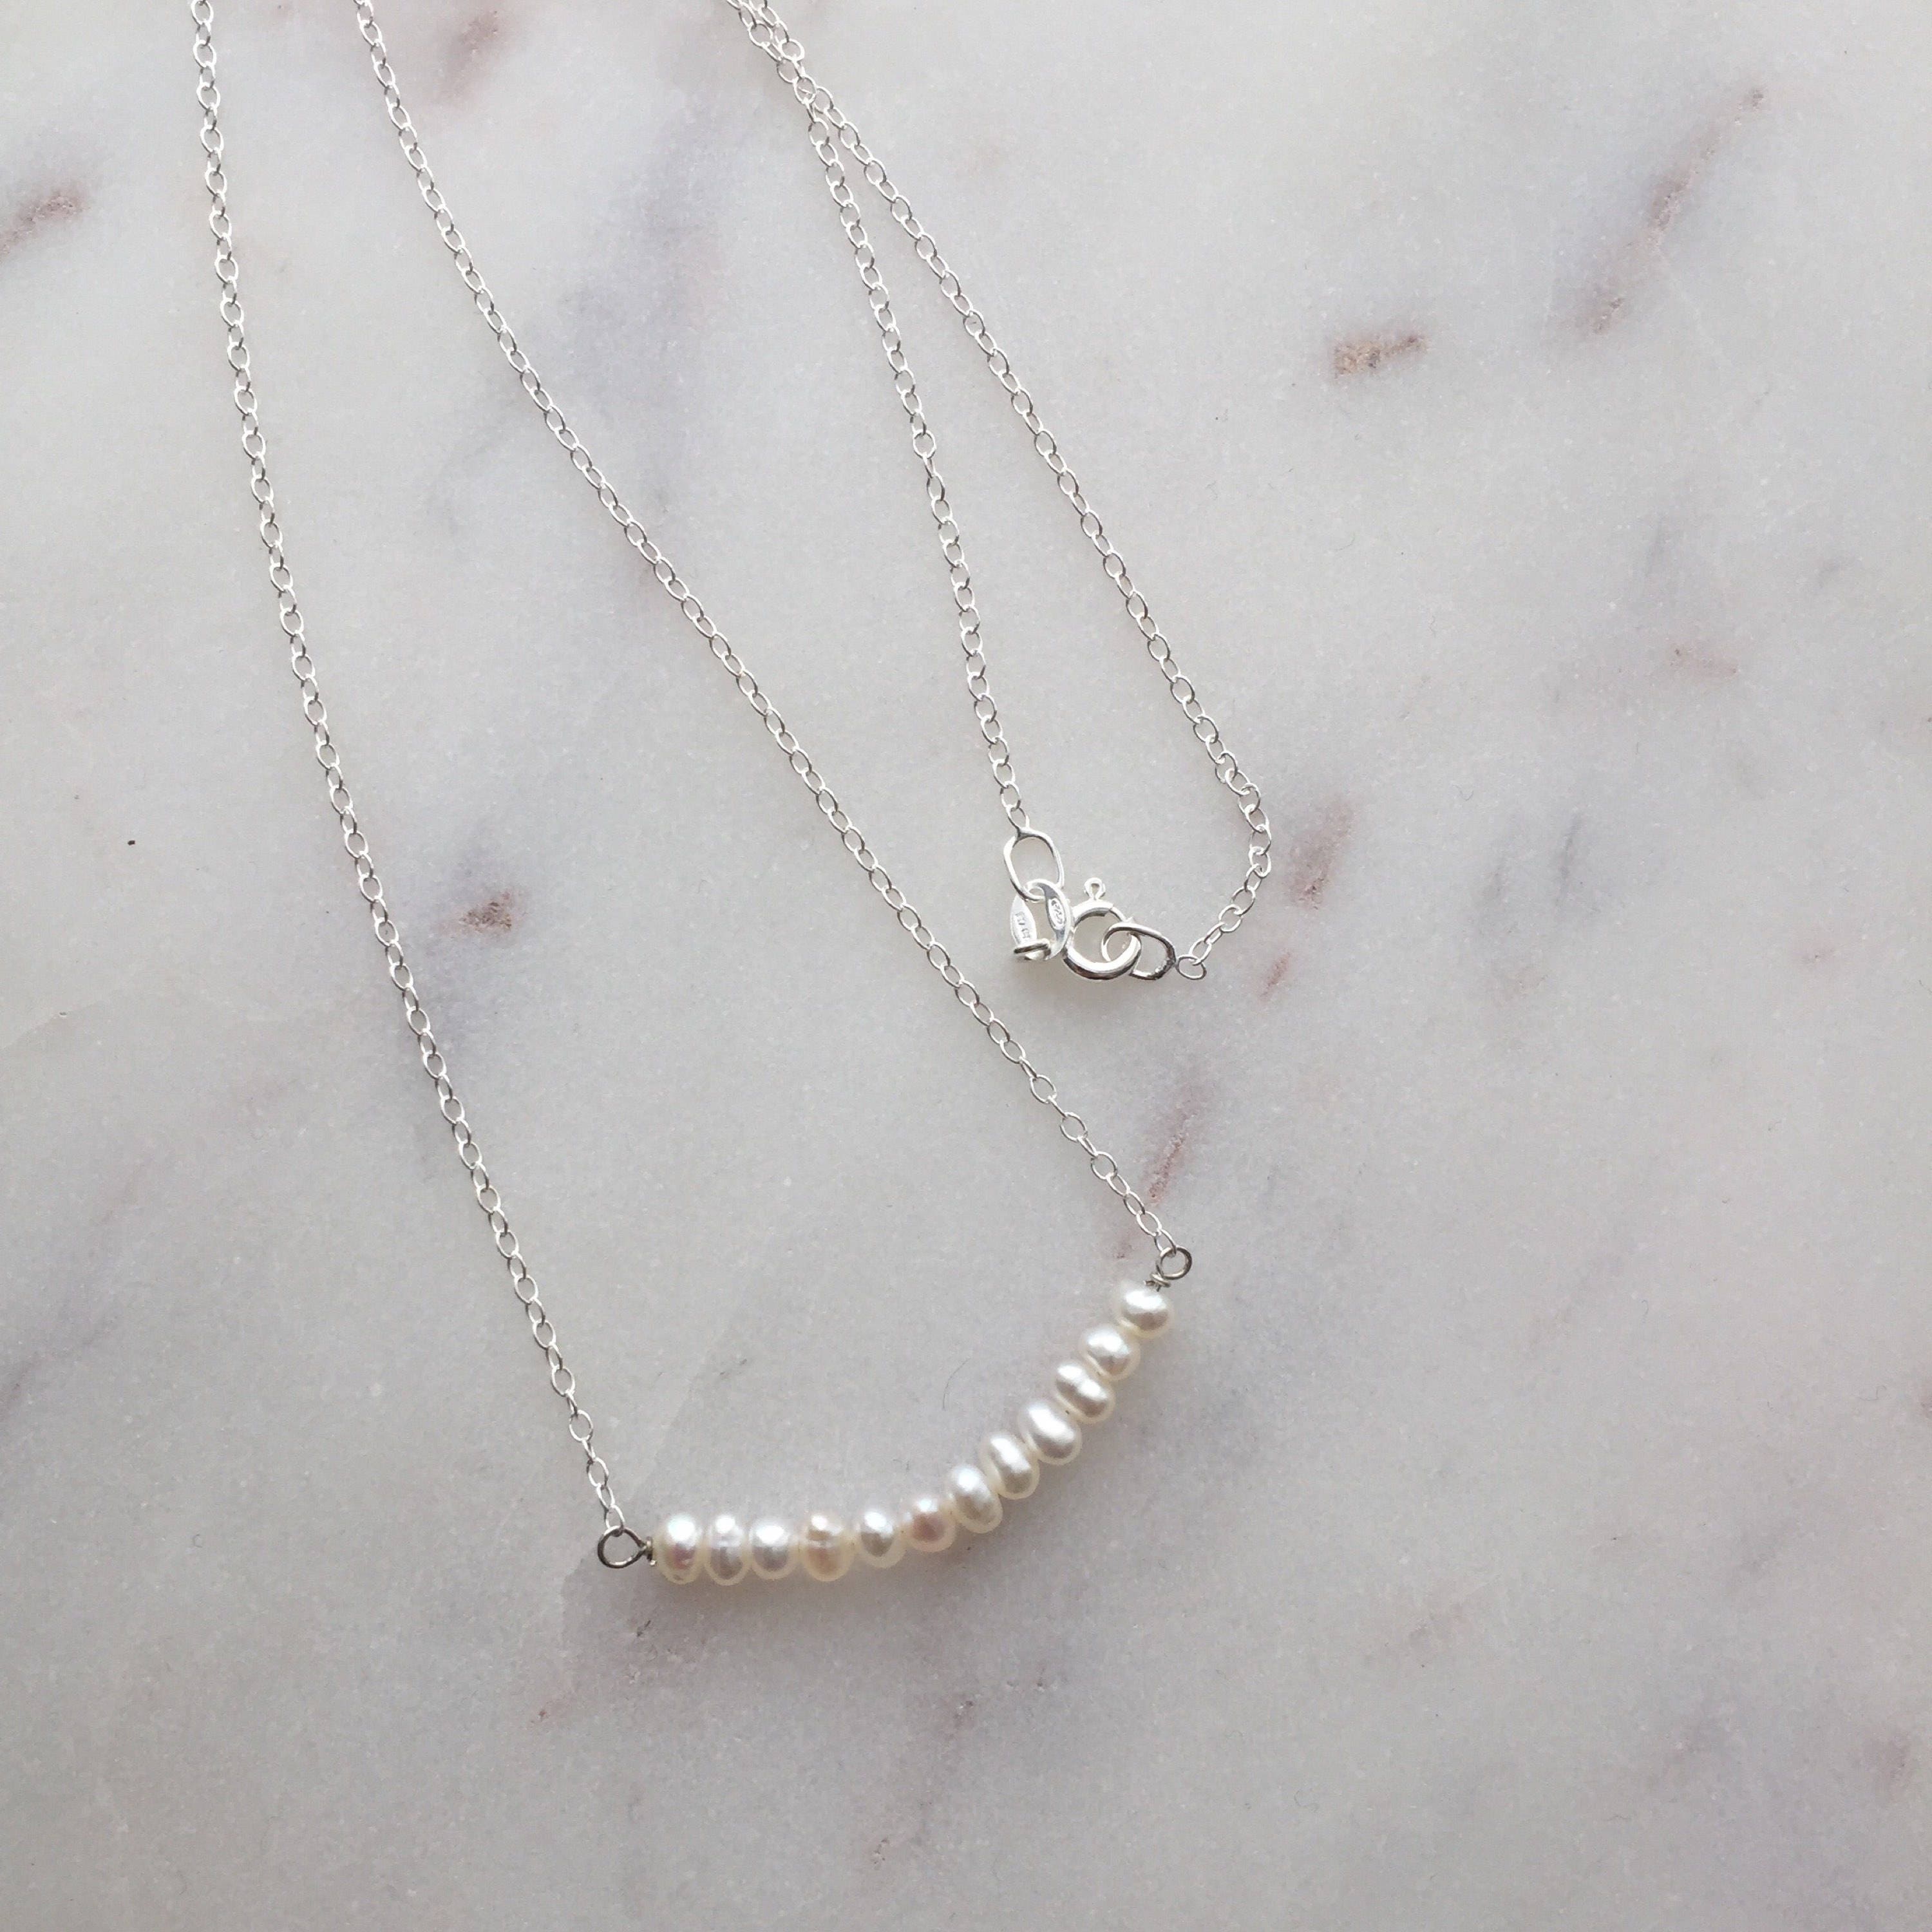 Tiny Pearls on Sterling Silver Necklace grace // Gift for - Etsy